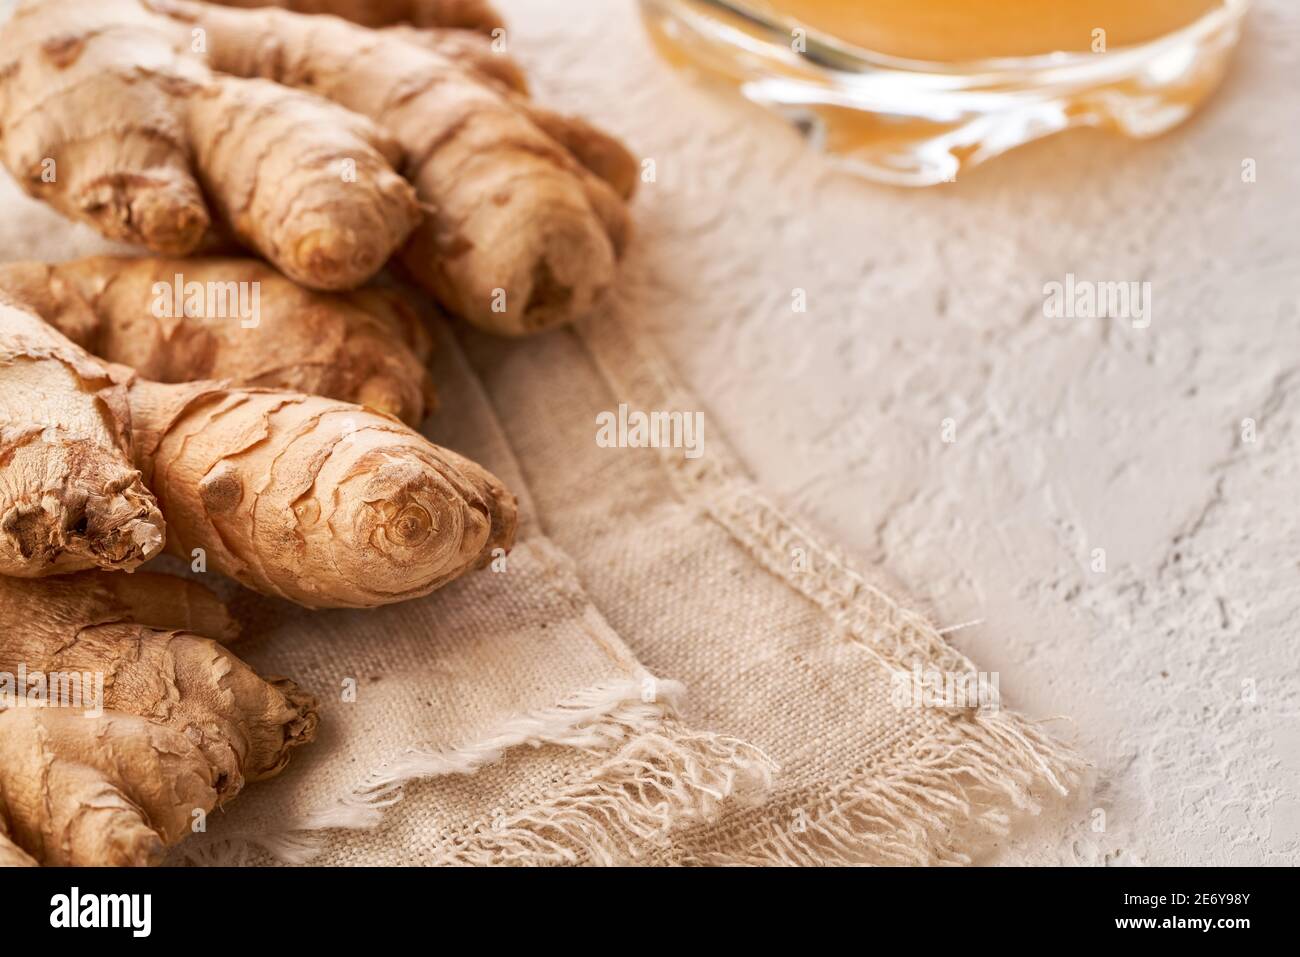 Whole ginger root on a bright table with copy space, with a natual probiotic drink in the background Stock Photo